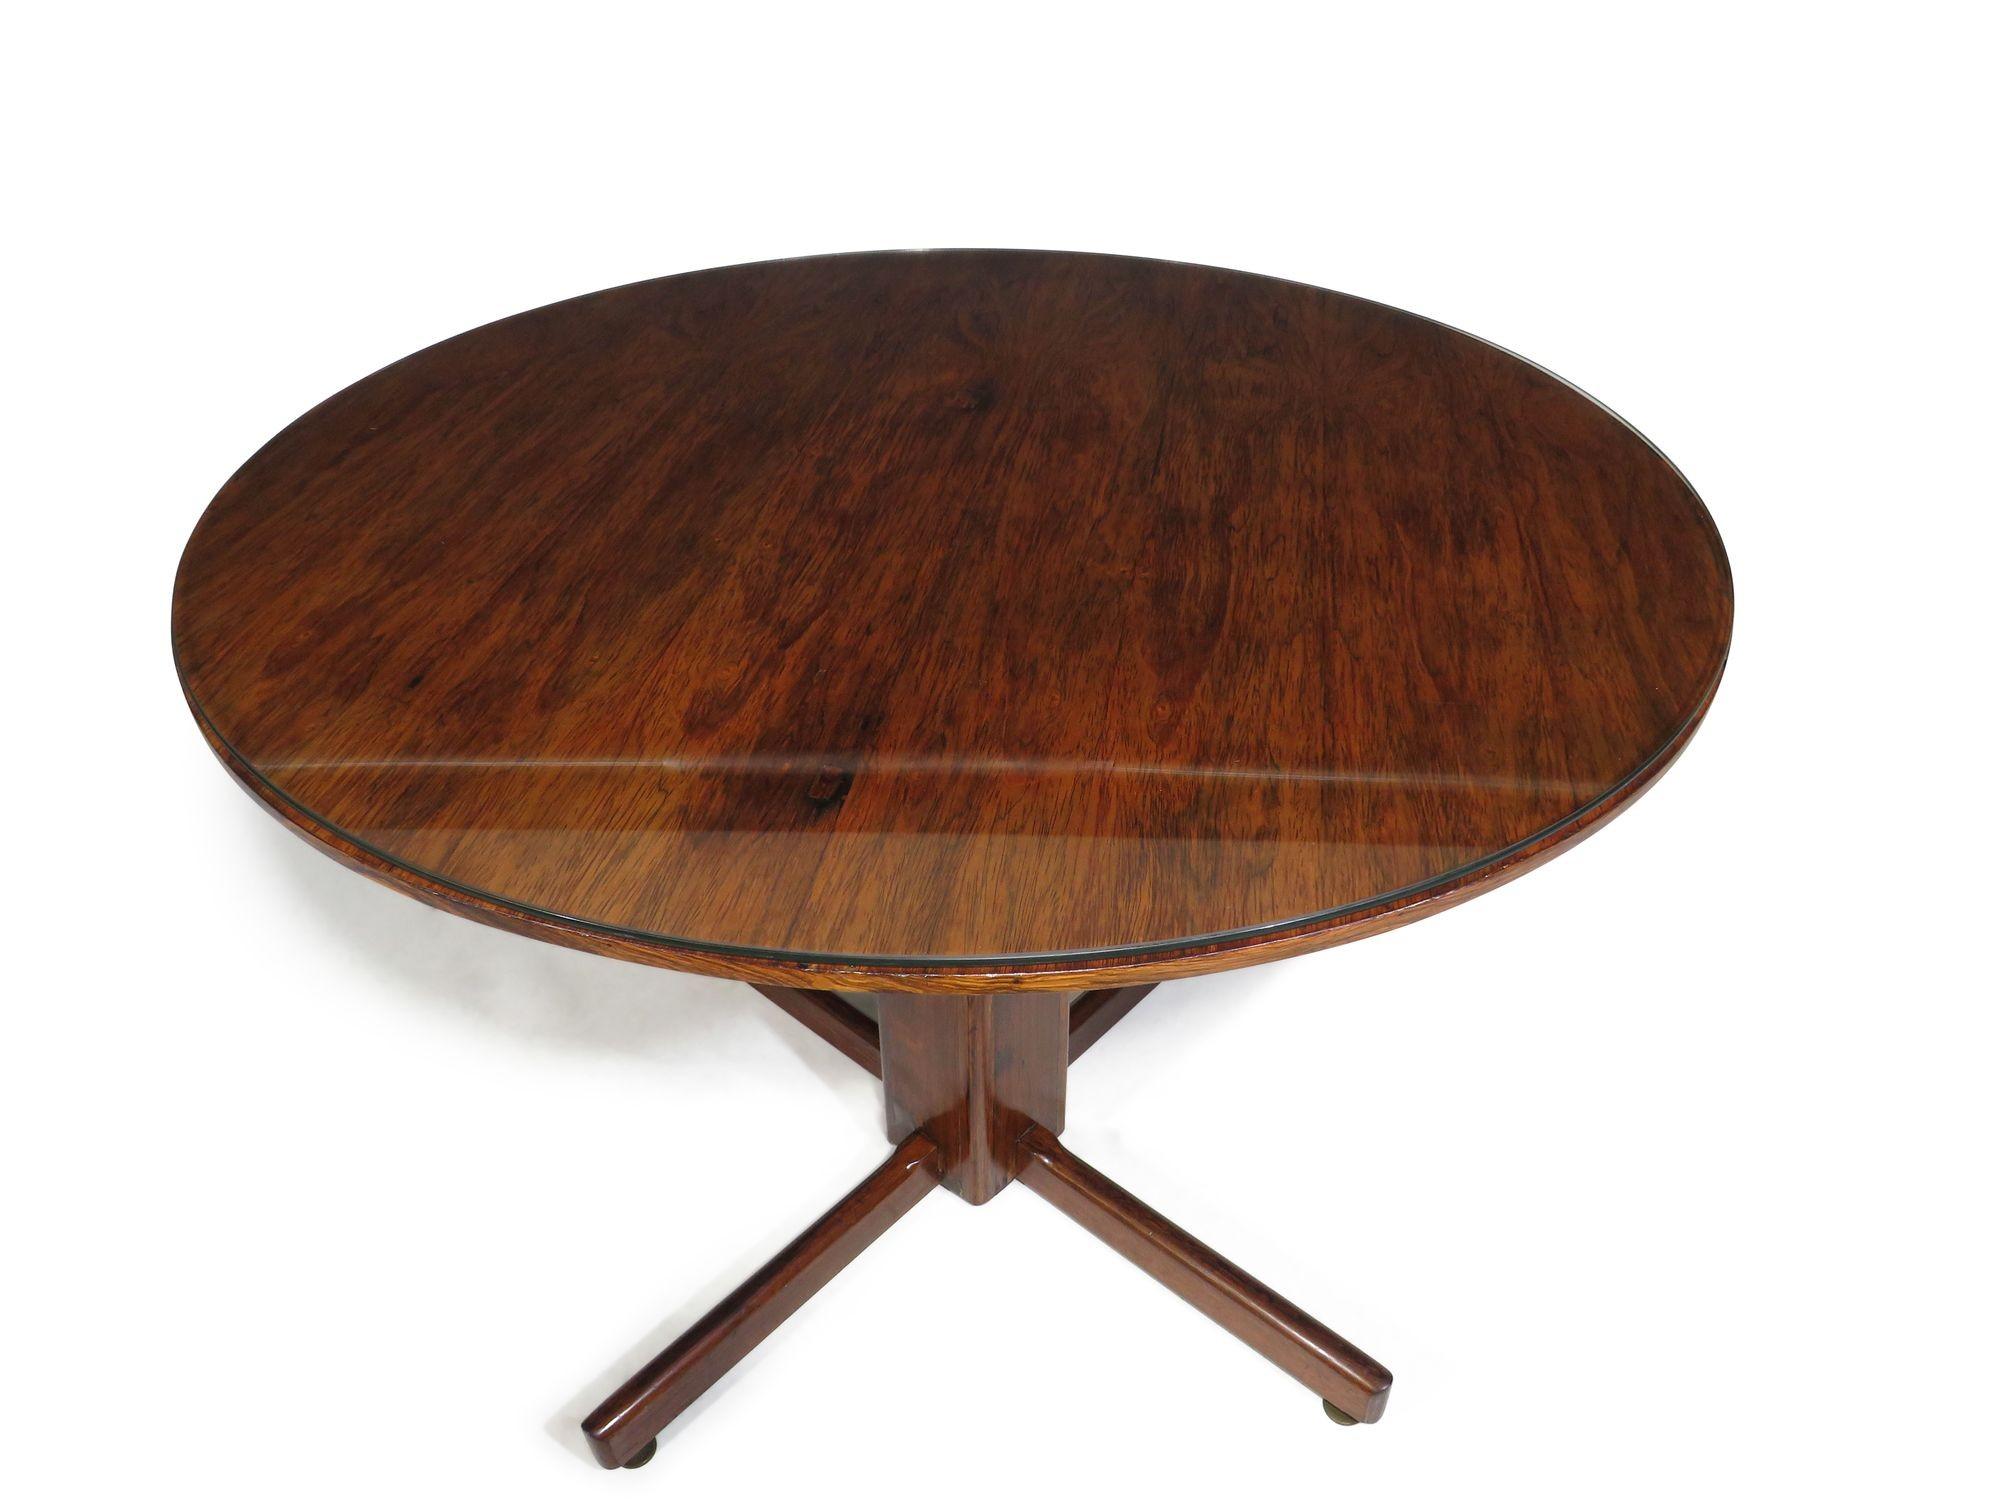 Brazilian Rosewood dining table in the manner of Sergio Rodriques' Alex table. The table is crafted of rosewood on pedestal base with glass top.
Measurements 
Diameter 42''
Height 30.75''